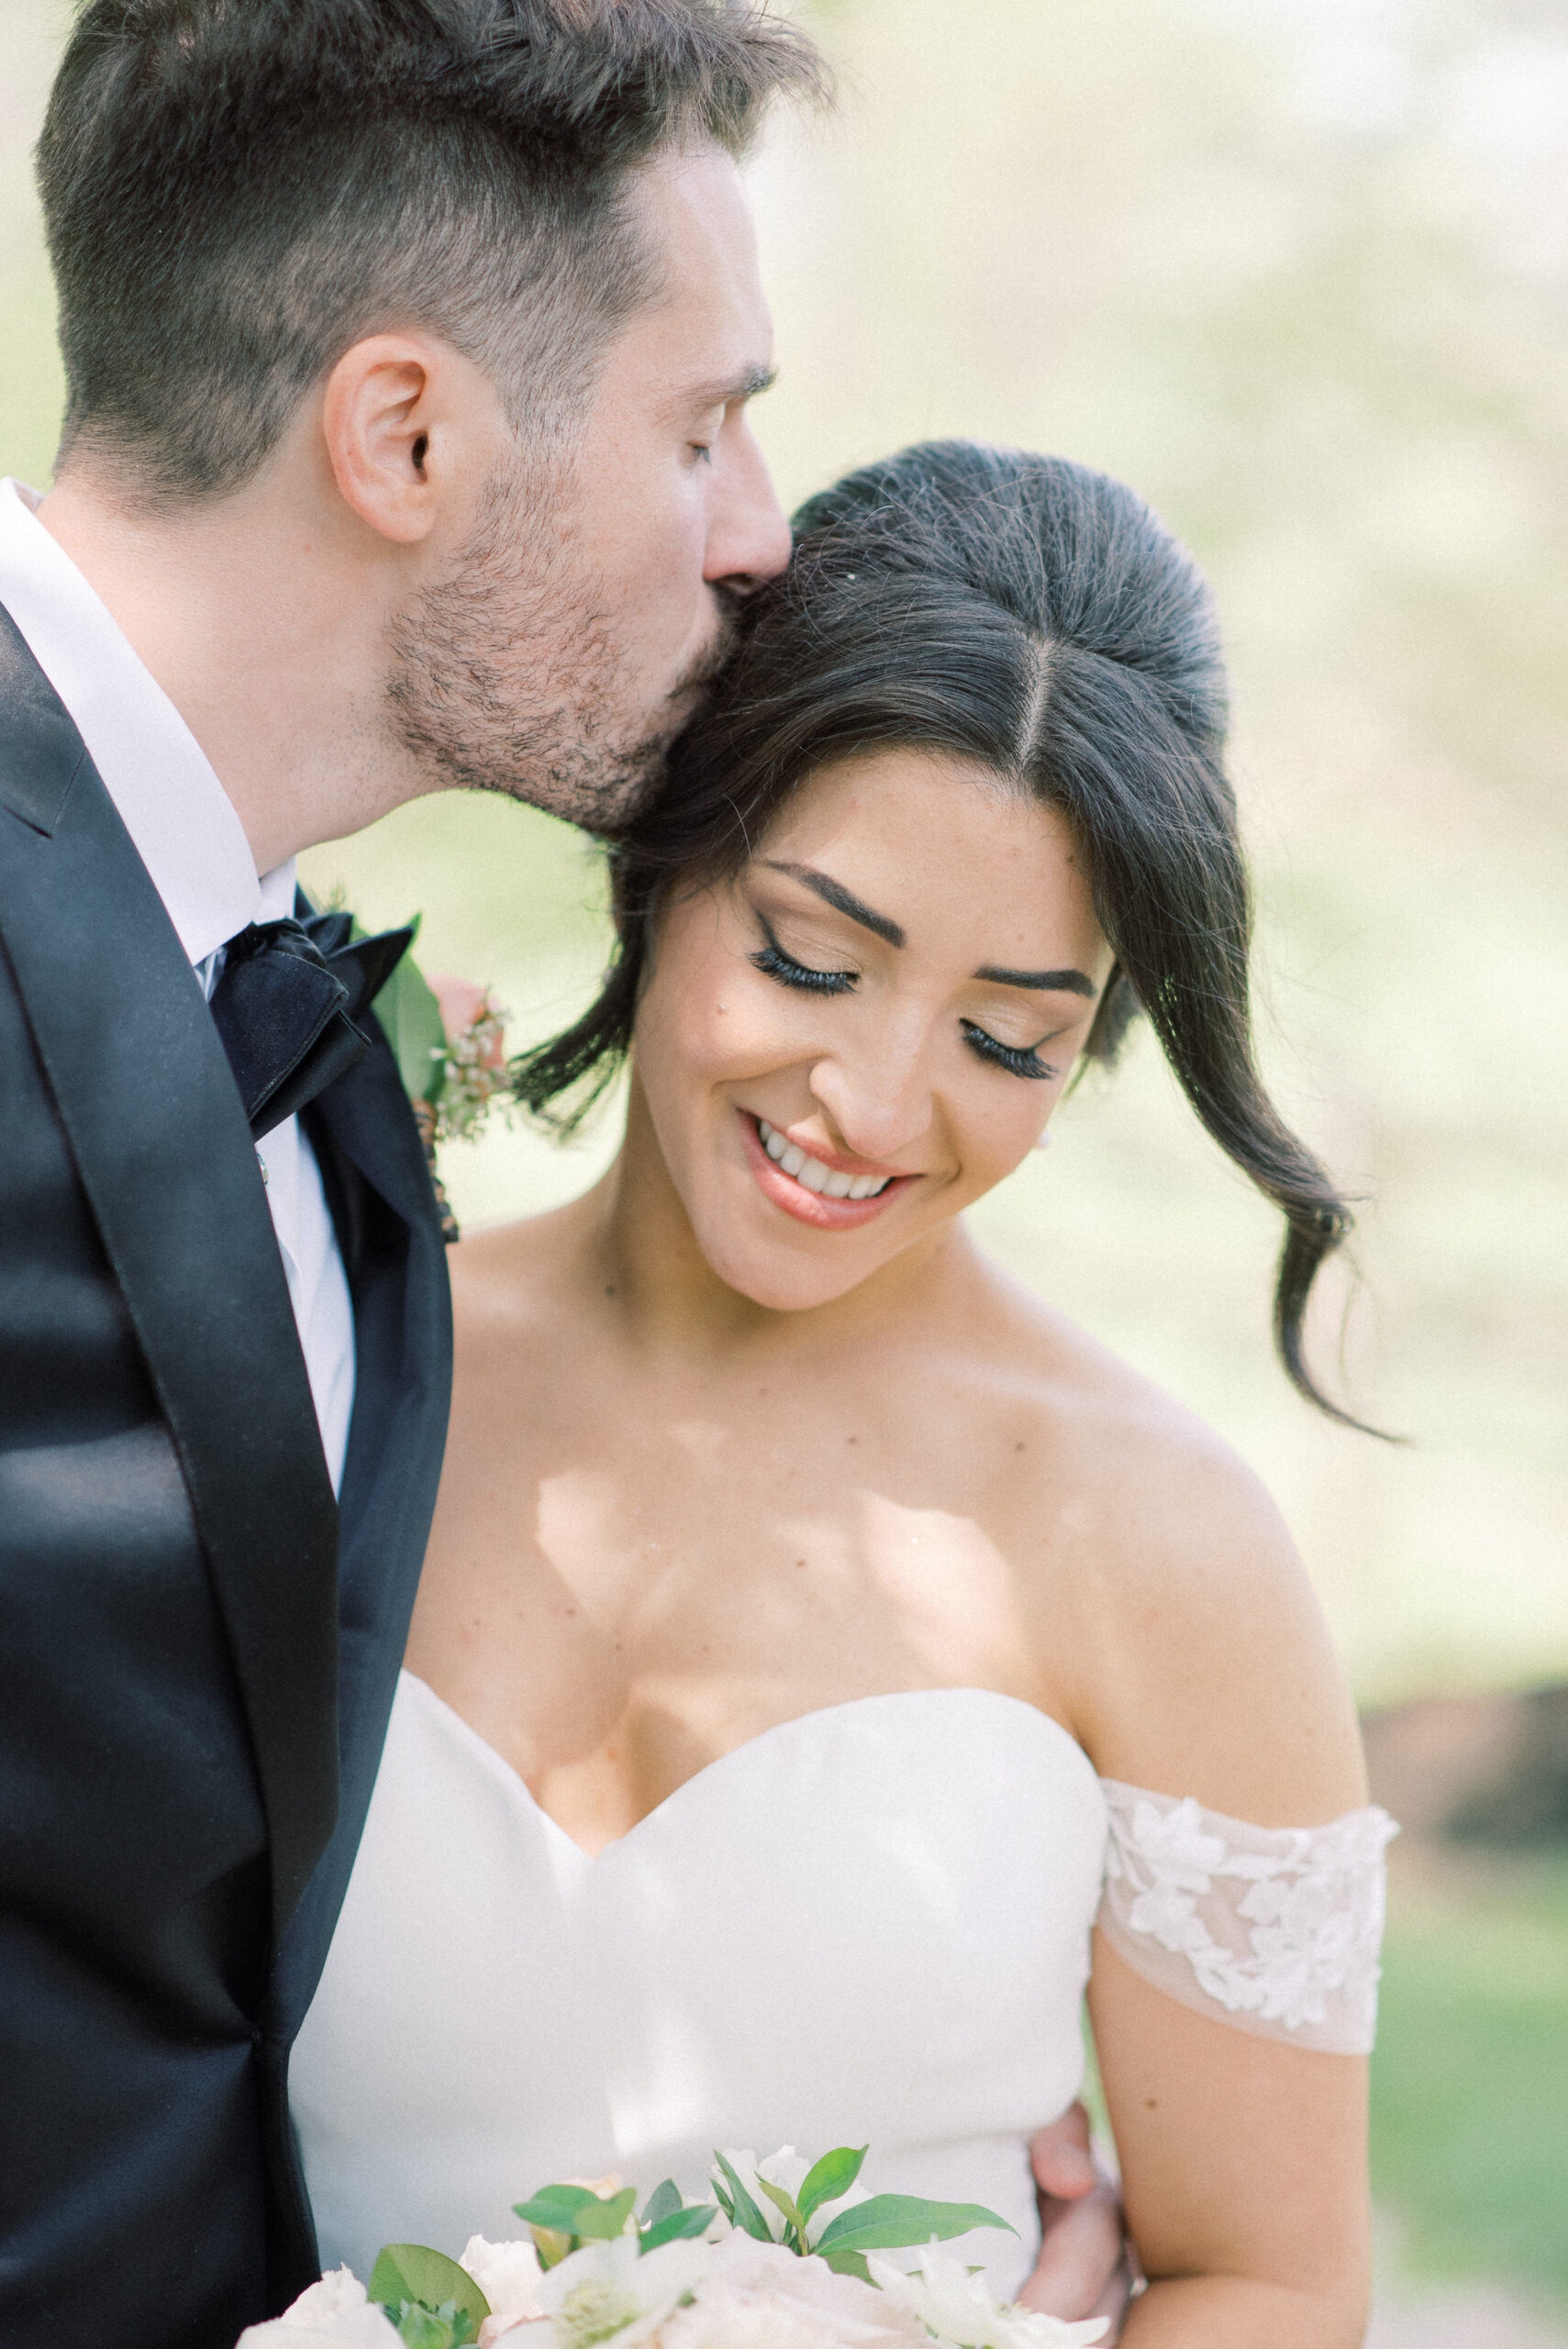 Romantic, light and airy spring garden wedding at the Crossed Keys Estate, Andover, New Jersey.